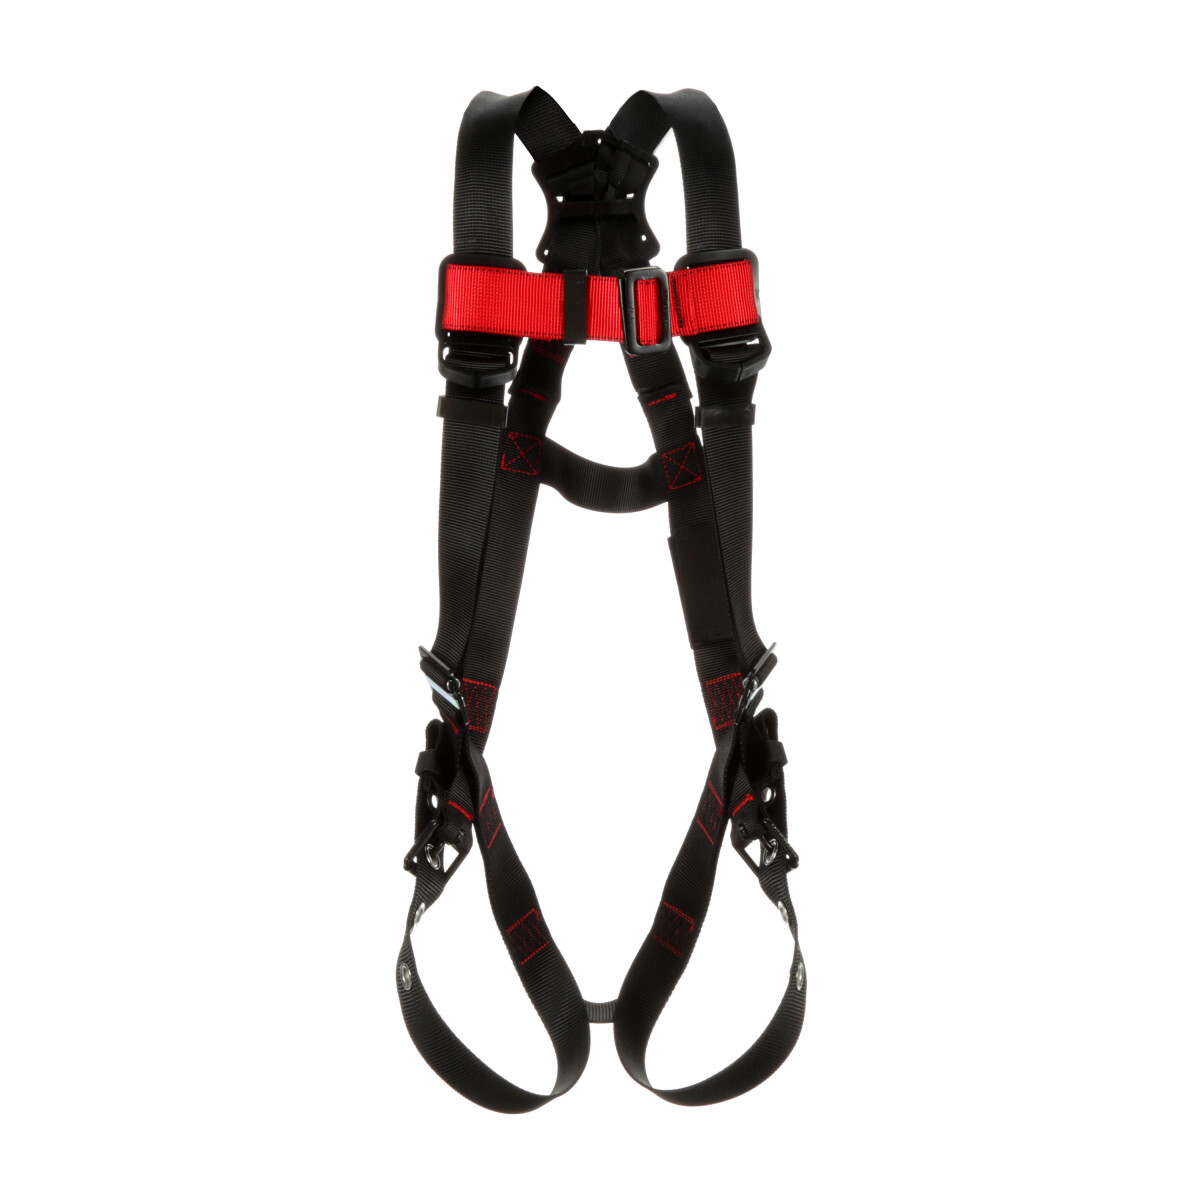 3M™ Protecta® Medium - Large Vest-Style Full Body Harness With Auto-Resetting Lanyard Keeper And Impact Indicator